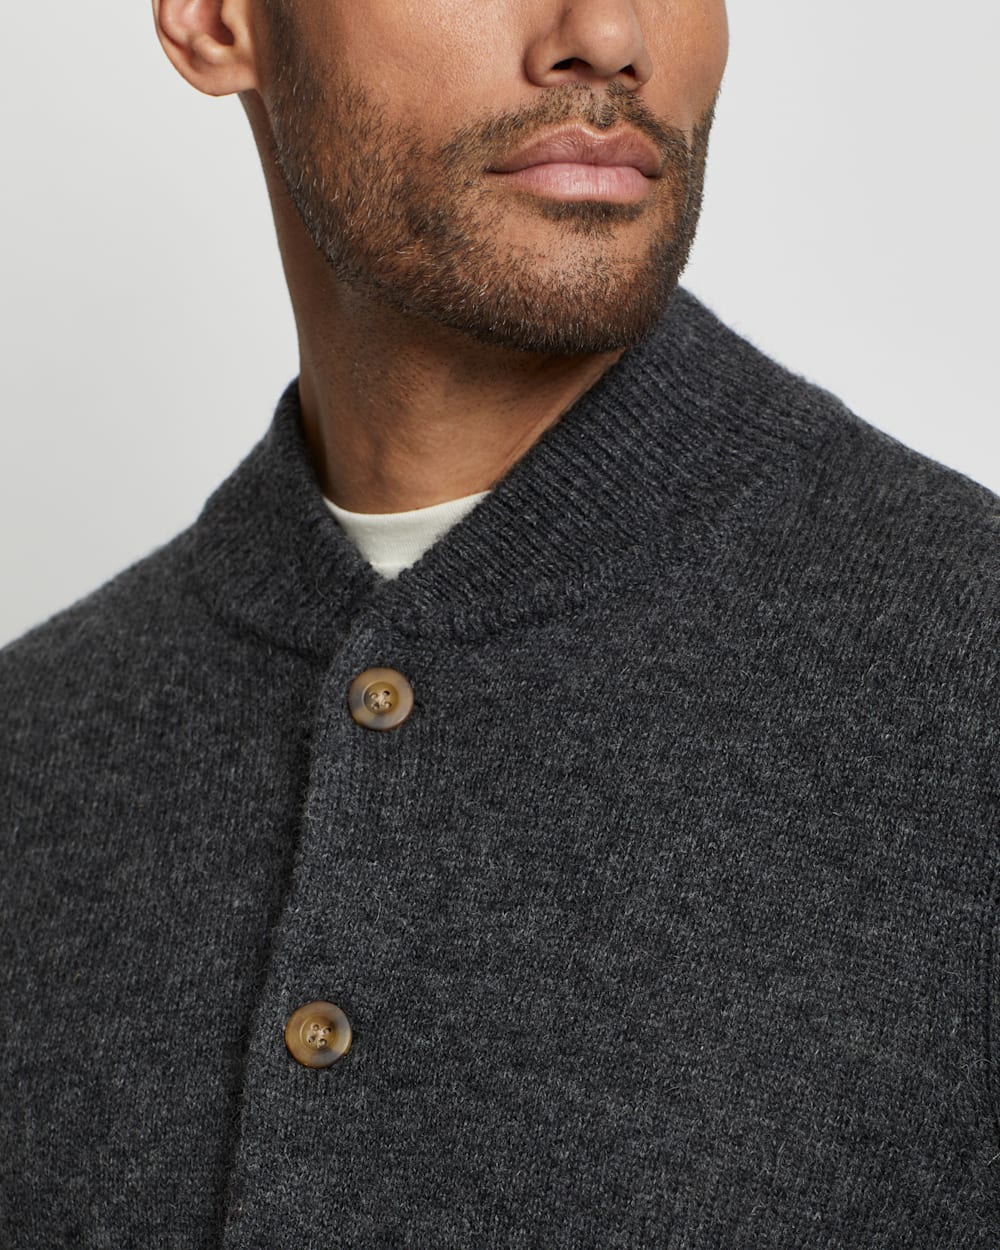 ALTERNATE VIEW OF MEN'S SHETLAND WASHABLE WOOL CARDIGAN IN CHARCOAL image number 2